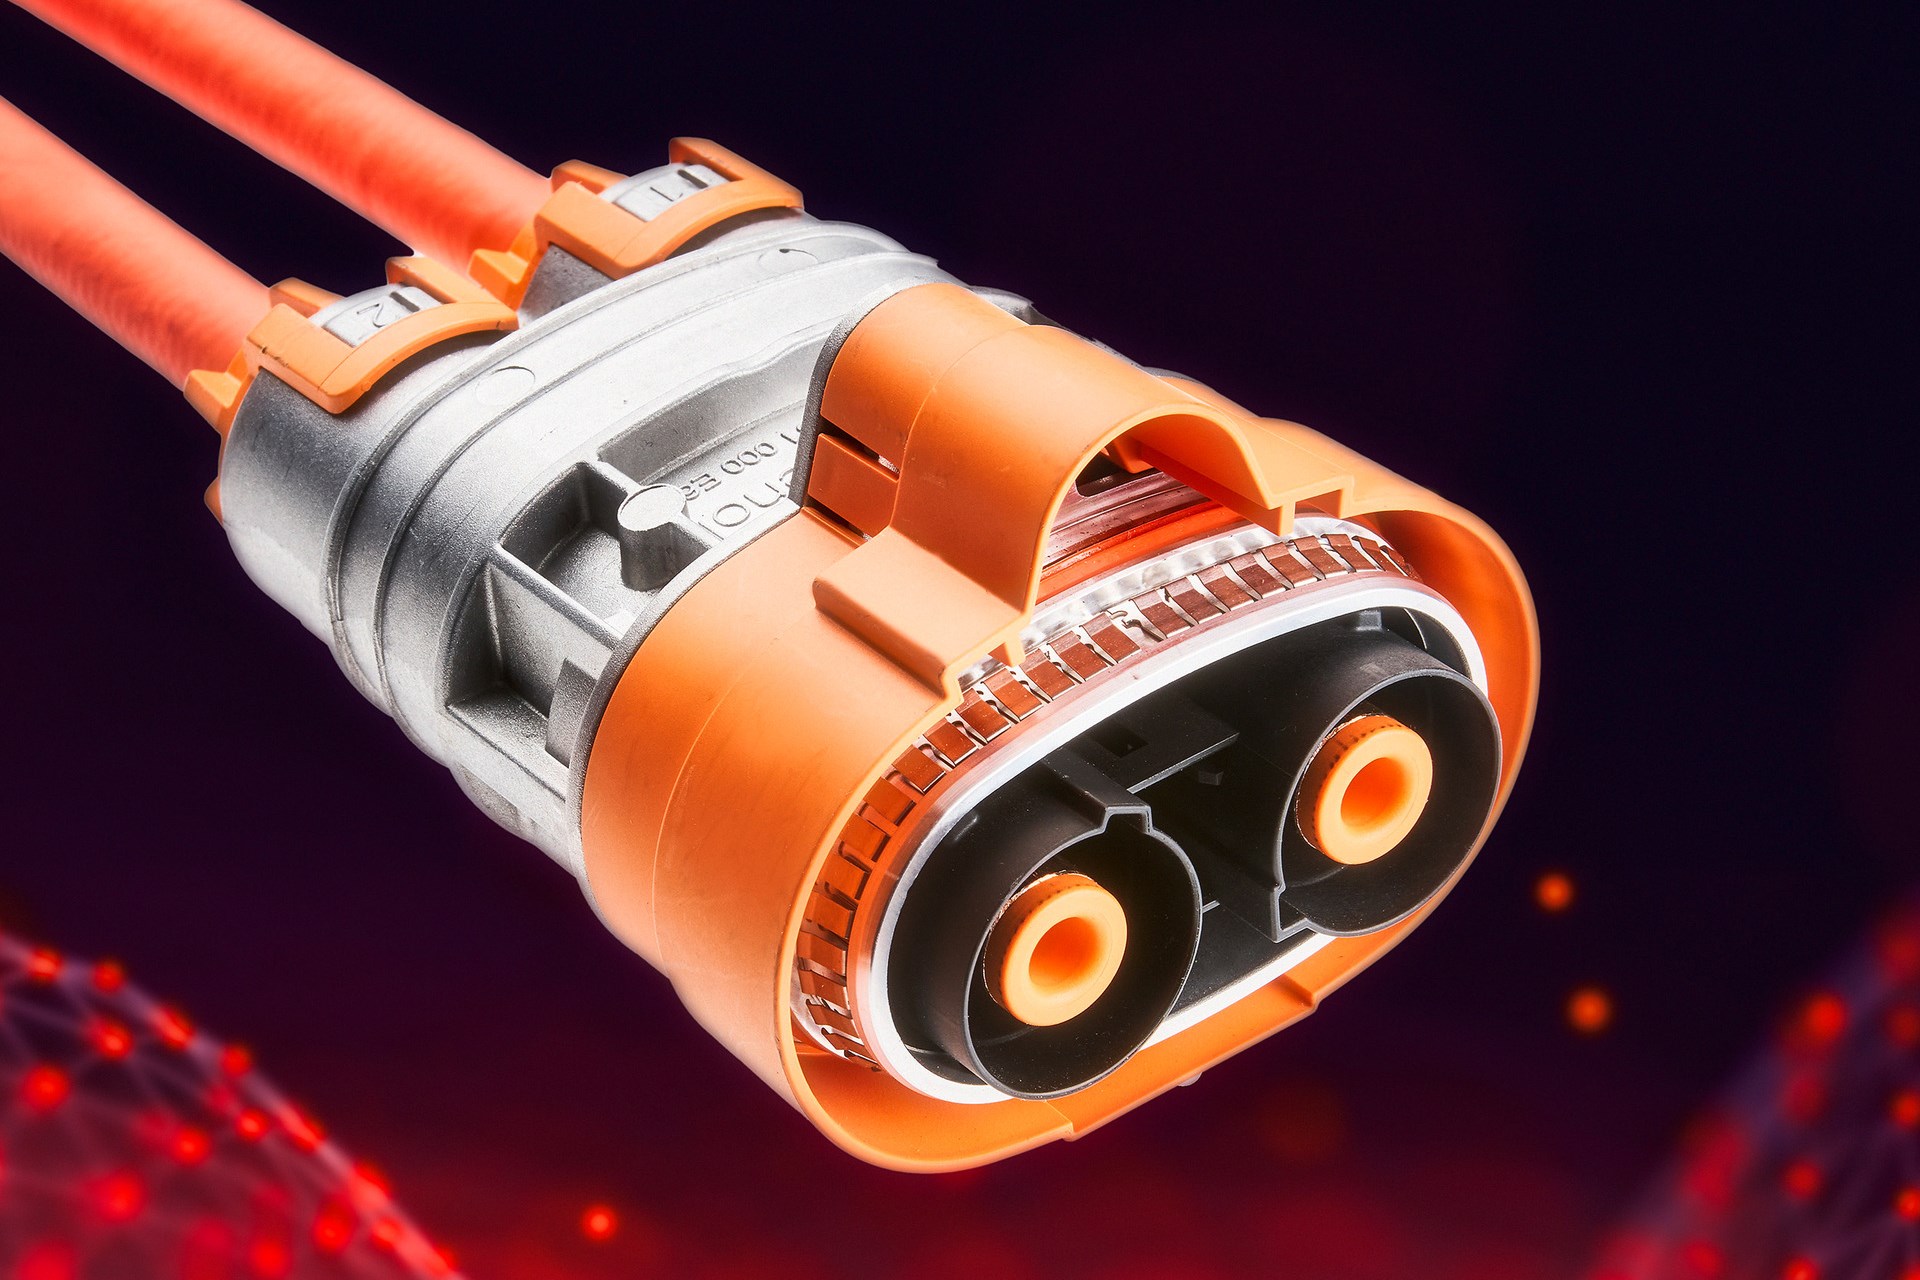 Connector made from Durethan BKV30FN04 for cable harnesses in electric models produced by a European-US automotive manufacturer. The halogen-free flame-retardant polyamide 6 can also be dyed in bright colors like orange (RAL 2003) 